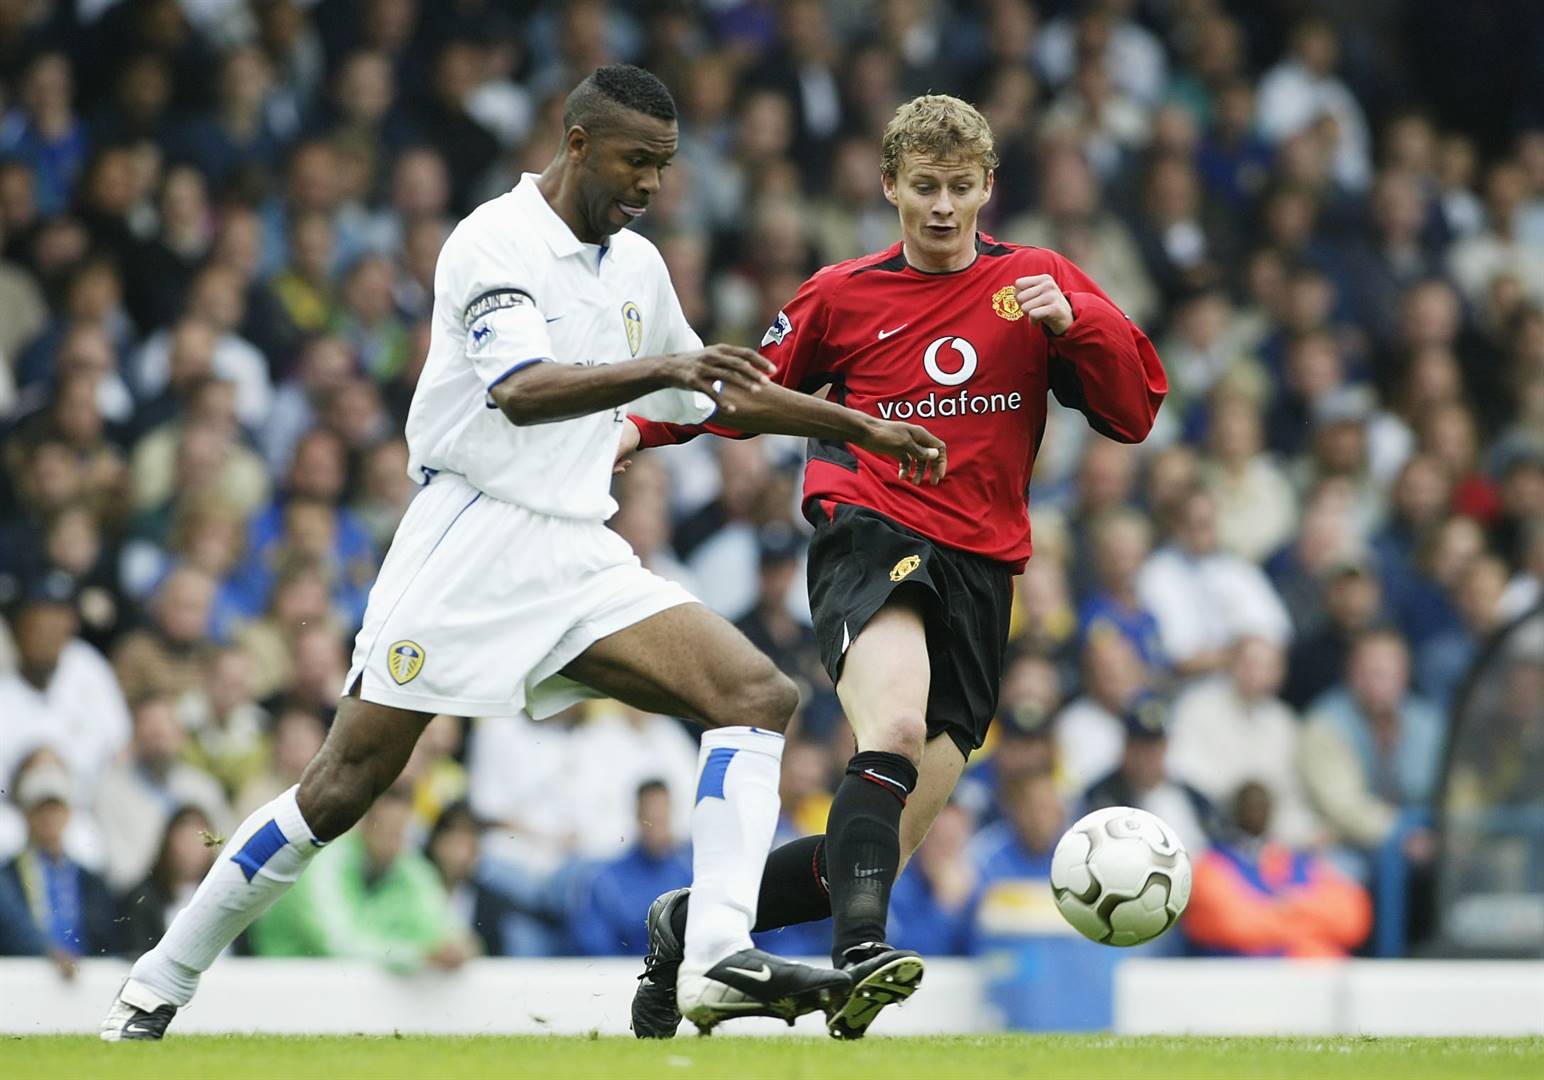 Lucas Radebe is regarded as one of the greatest defenders in the modern era amongst Leeds fans. Photo: Getty Images